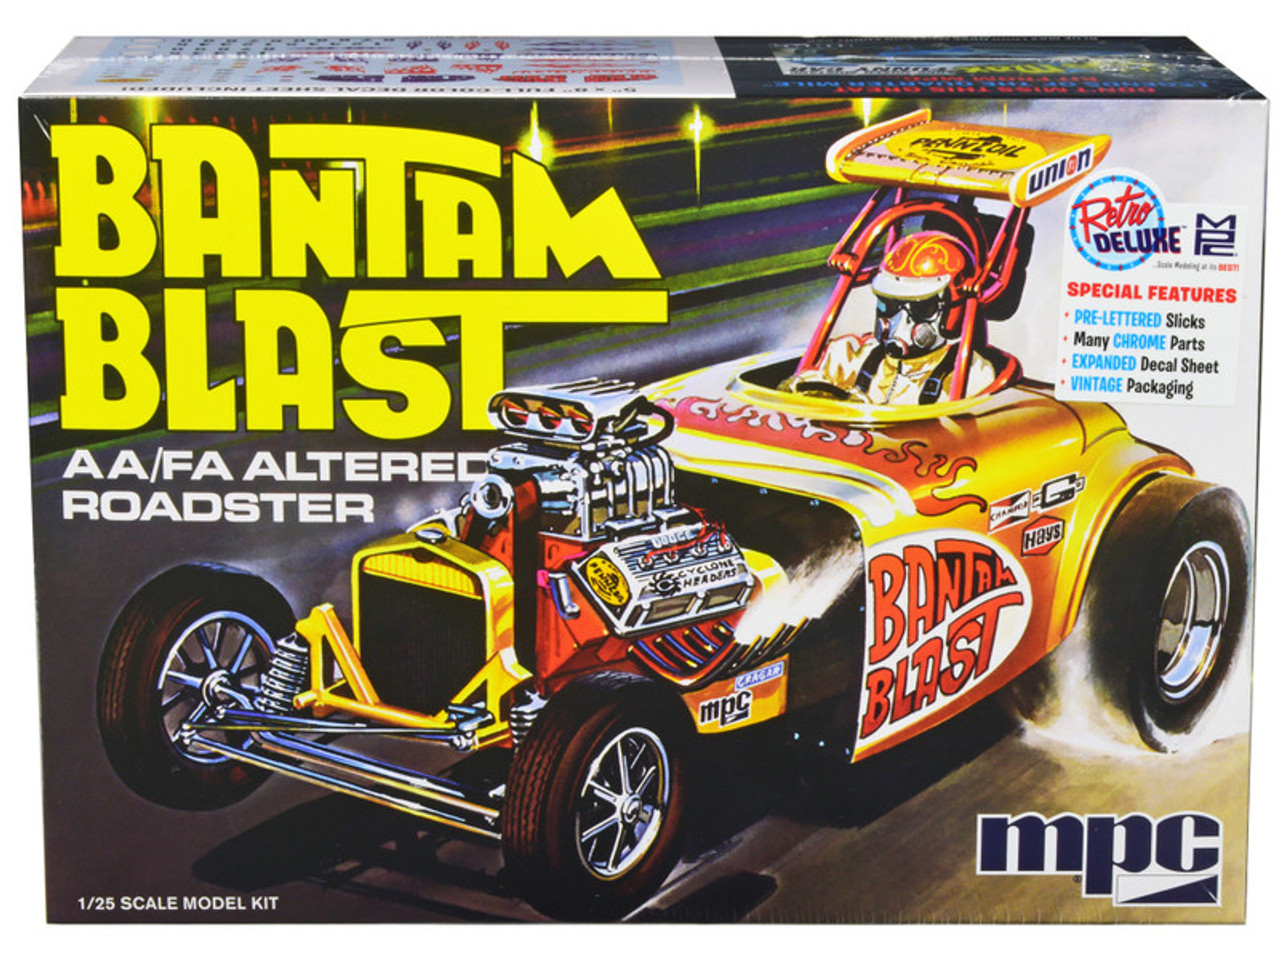 Skill 2 Model Kit "Bantam Blast" AA/FA Altered Roadster/Dragster 1/25 Scale Model by MPC